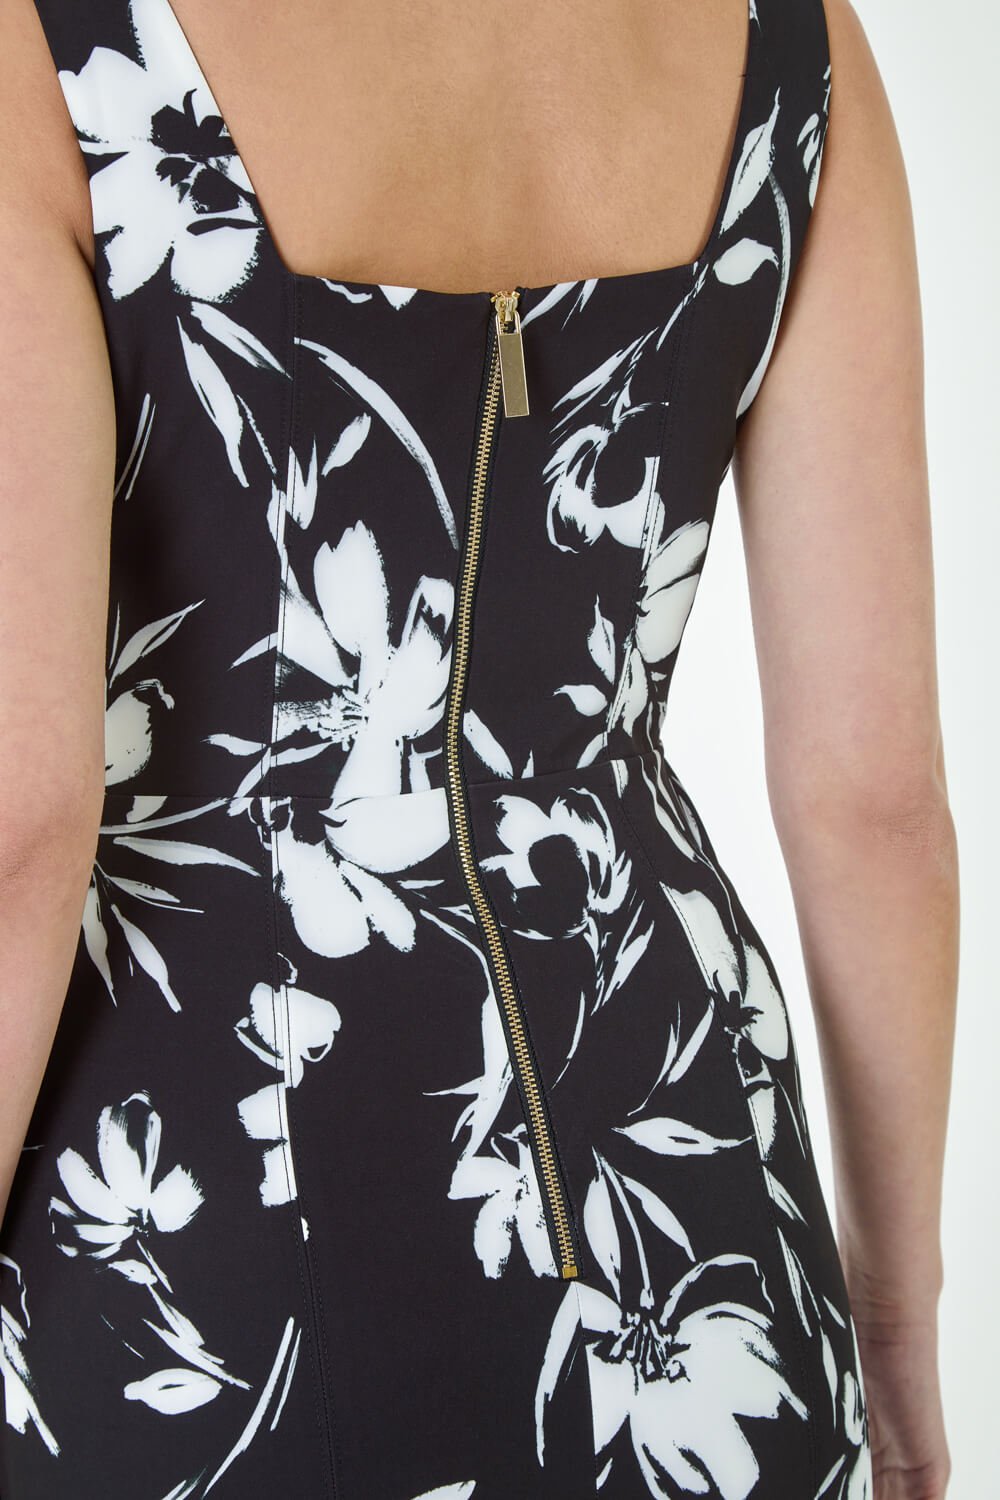 Black Floral Corset Detail Stretch Bodycon Dress, Image 5 of 5